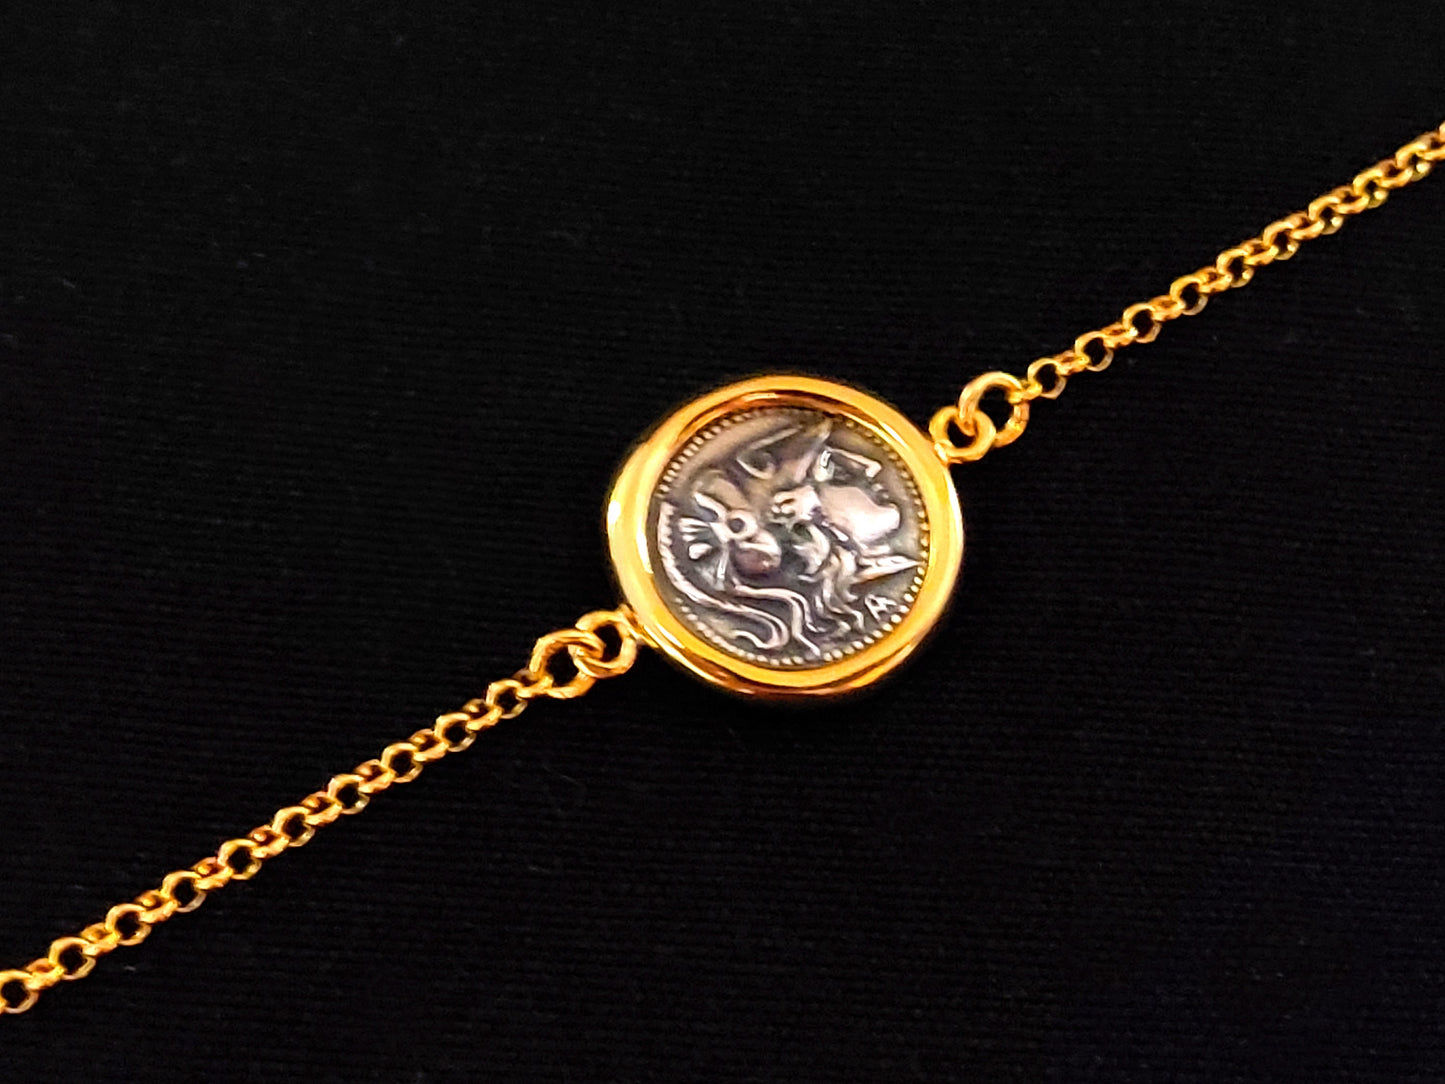 Goddess Athena Gold Plated Silver Chain Coin 17mm Bracelet